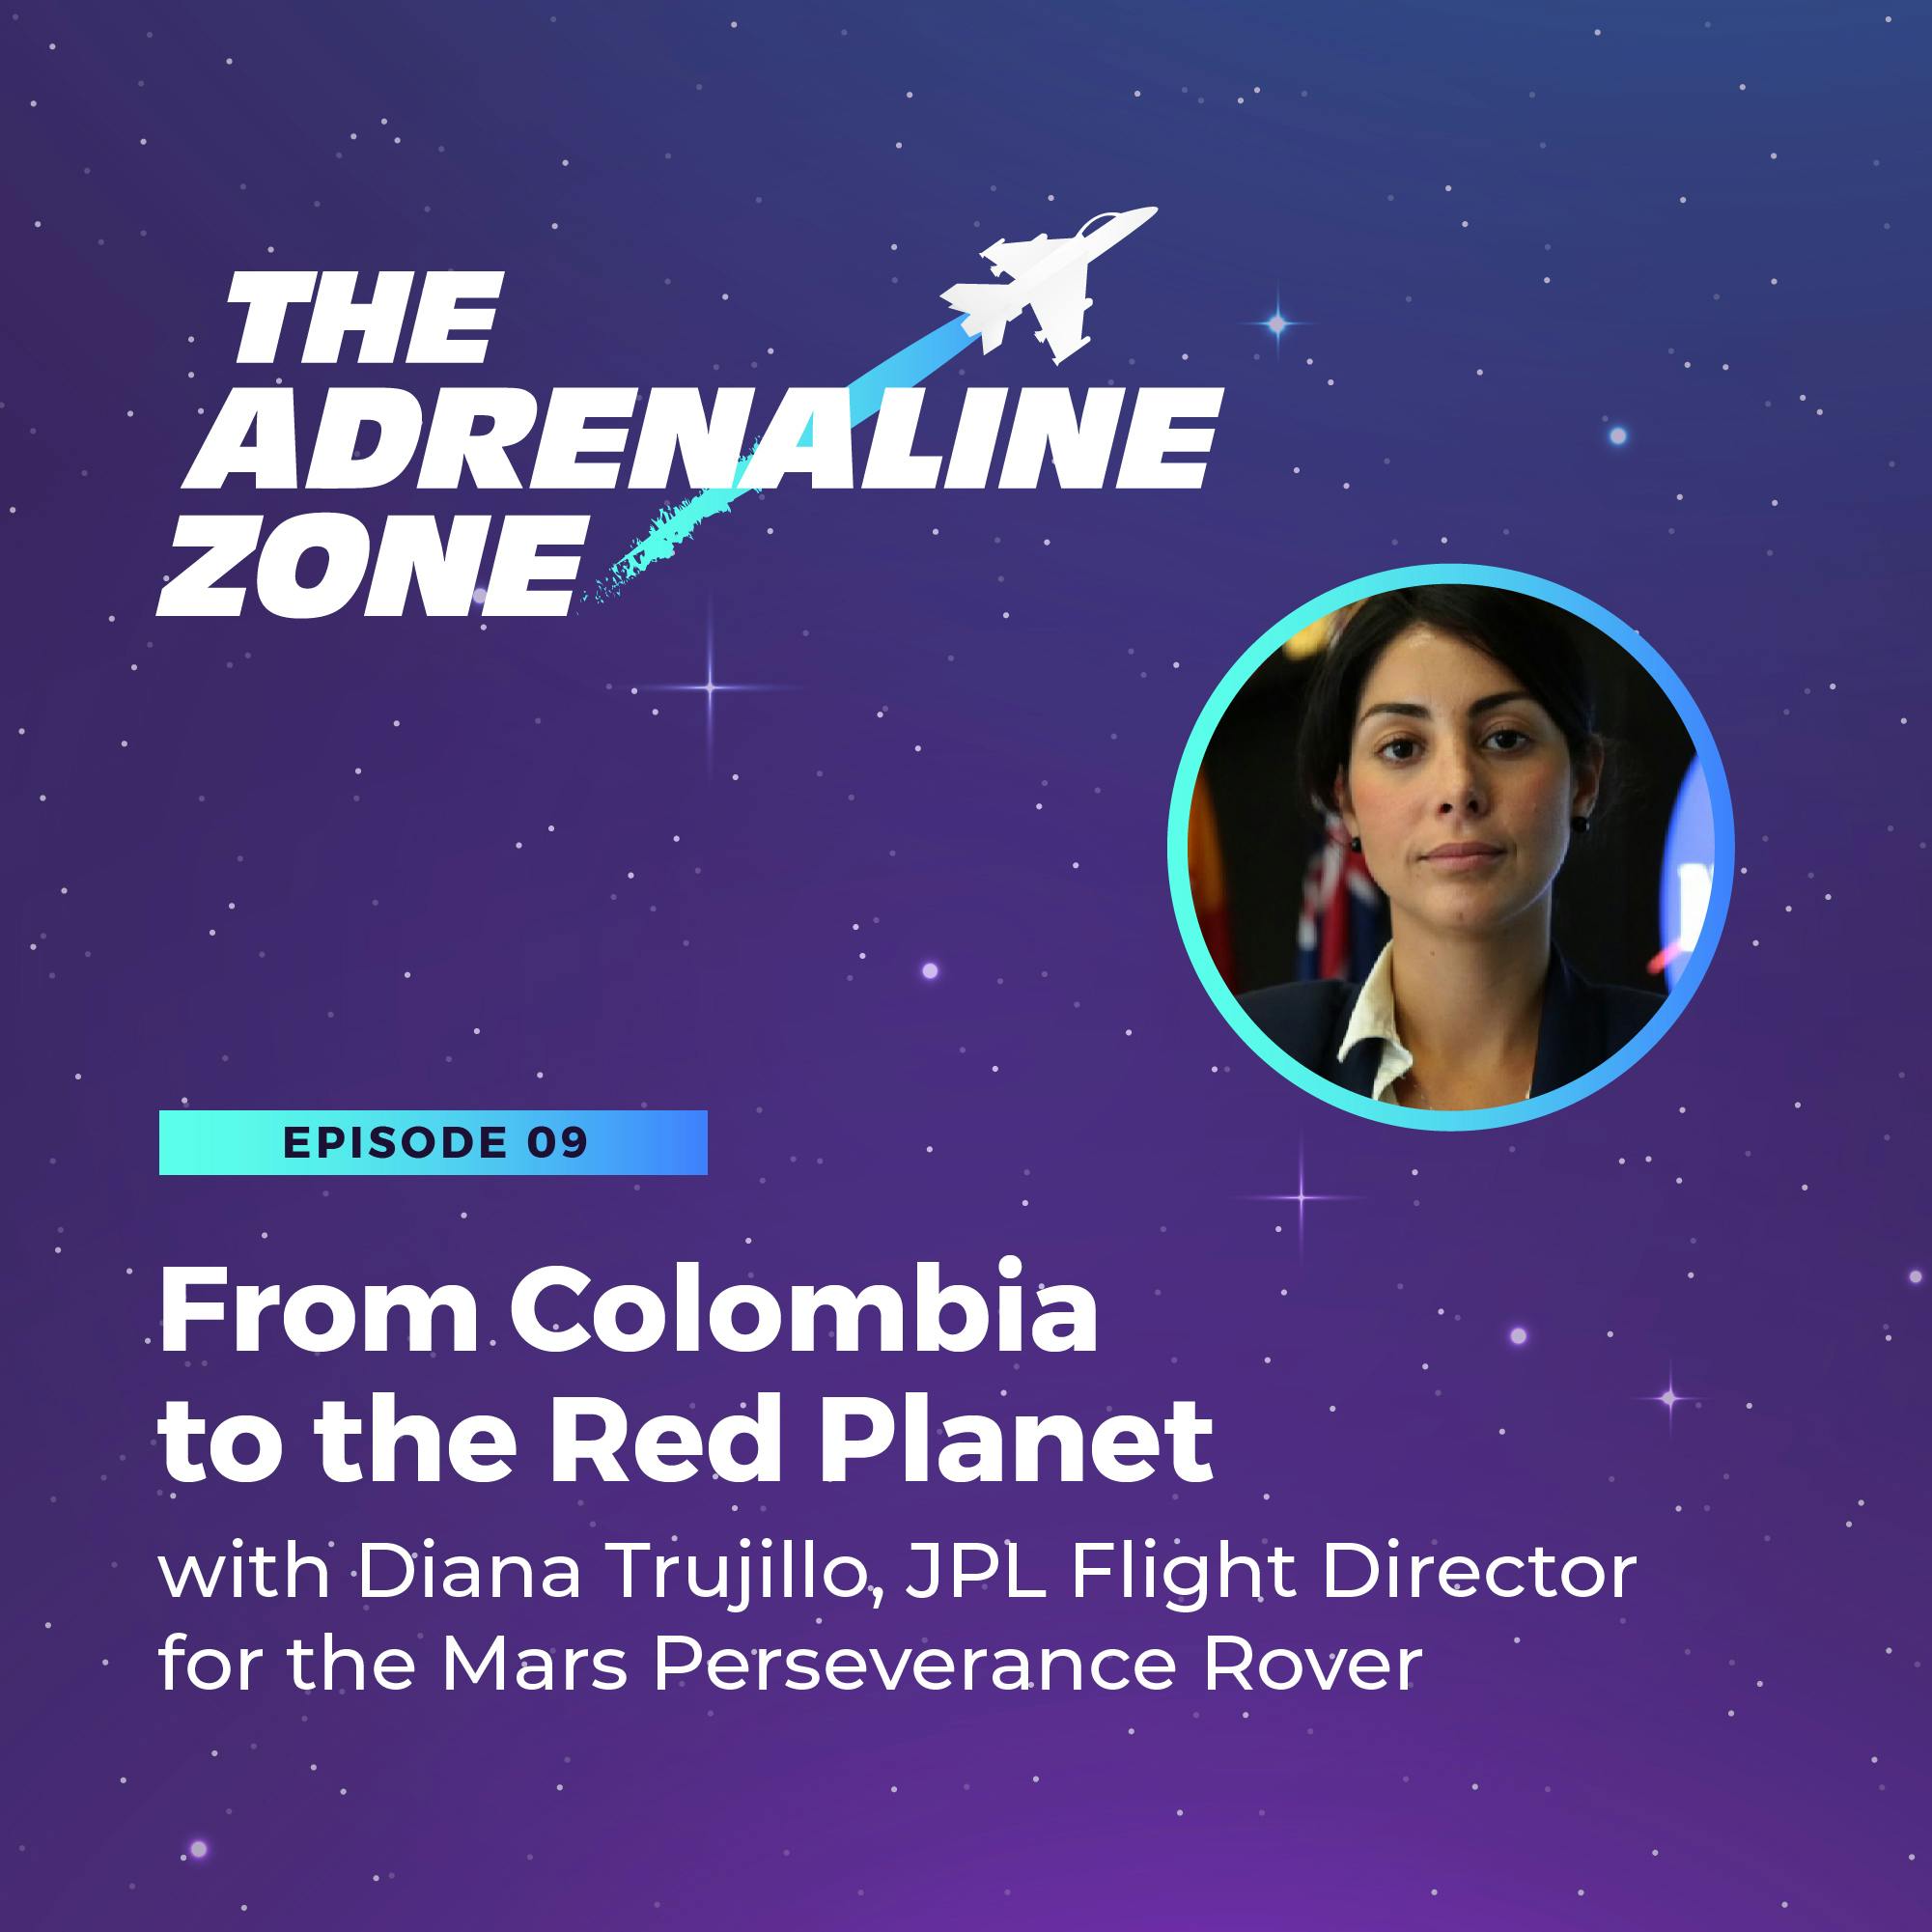 From Colombia to the Red Planet with Diana Trujillo, JPL Flight Director for the Mars Perseverance Rover.